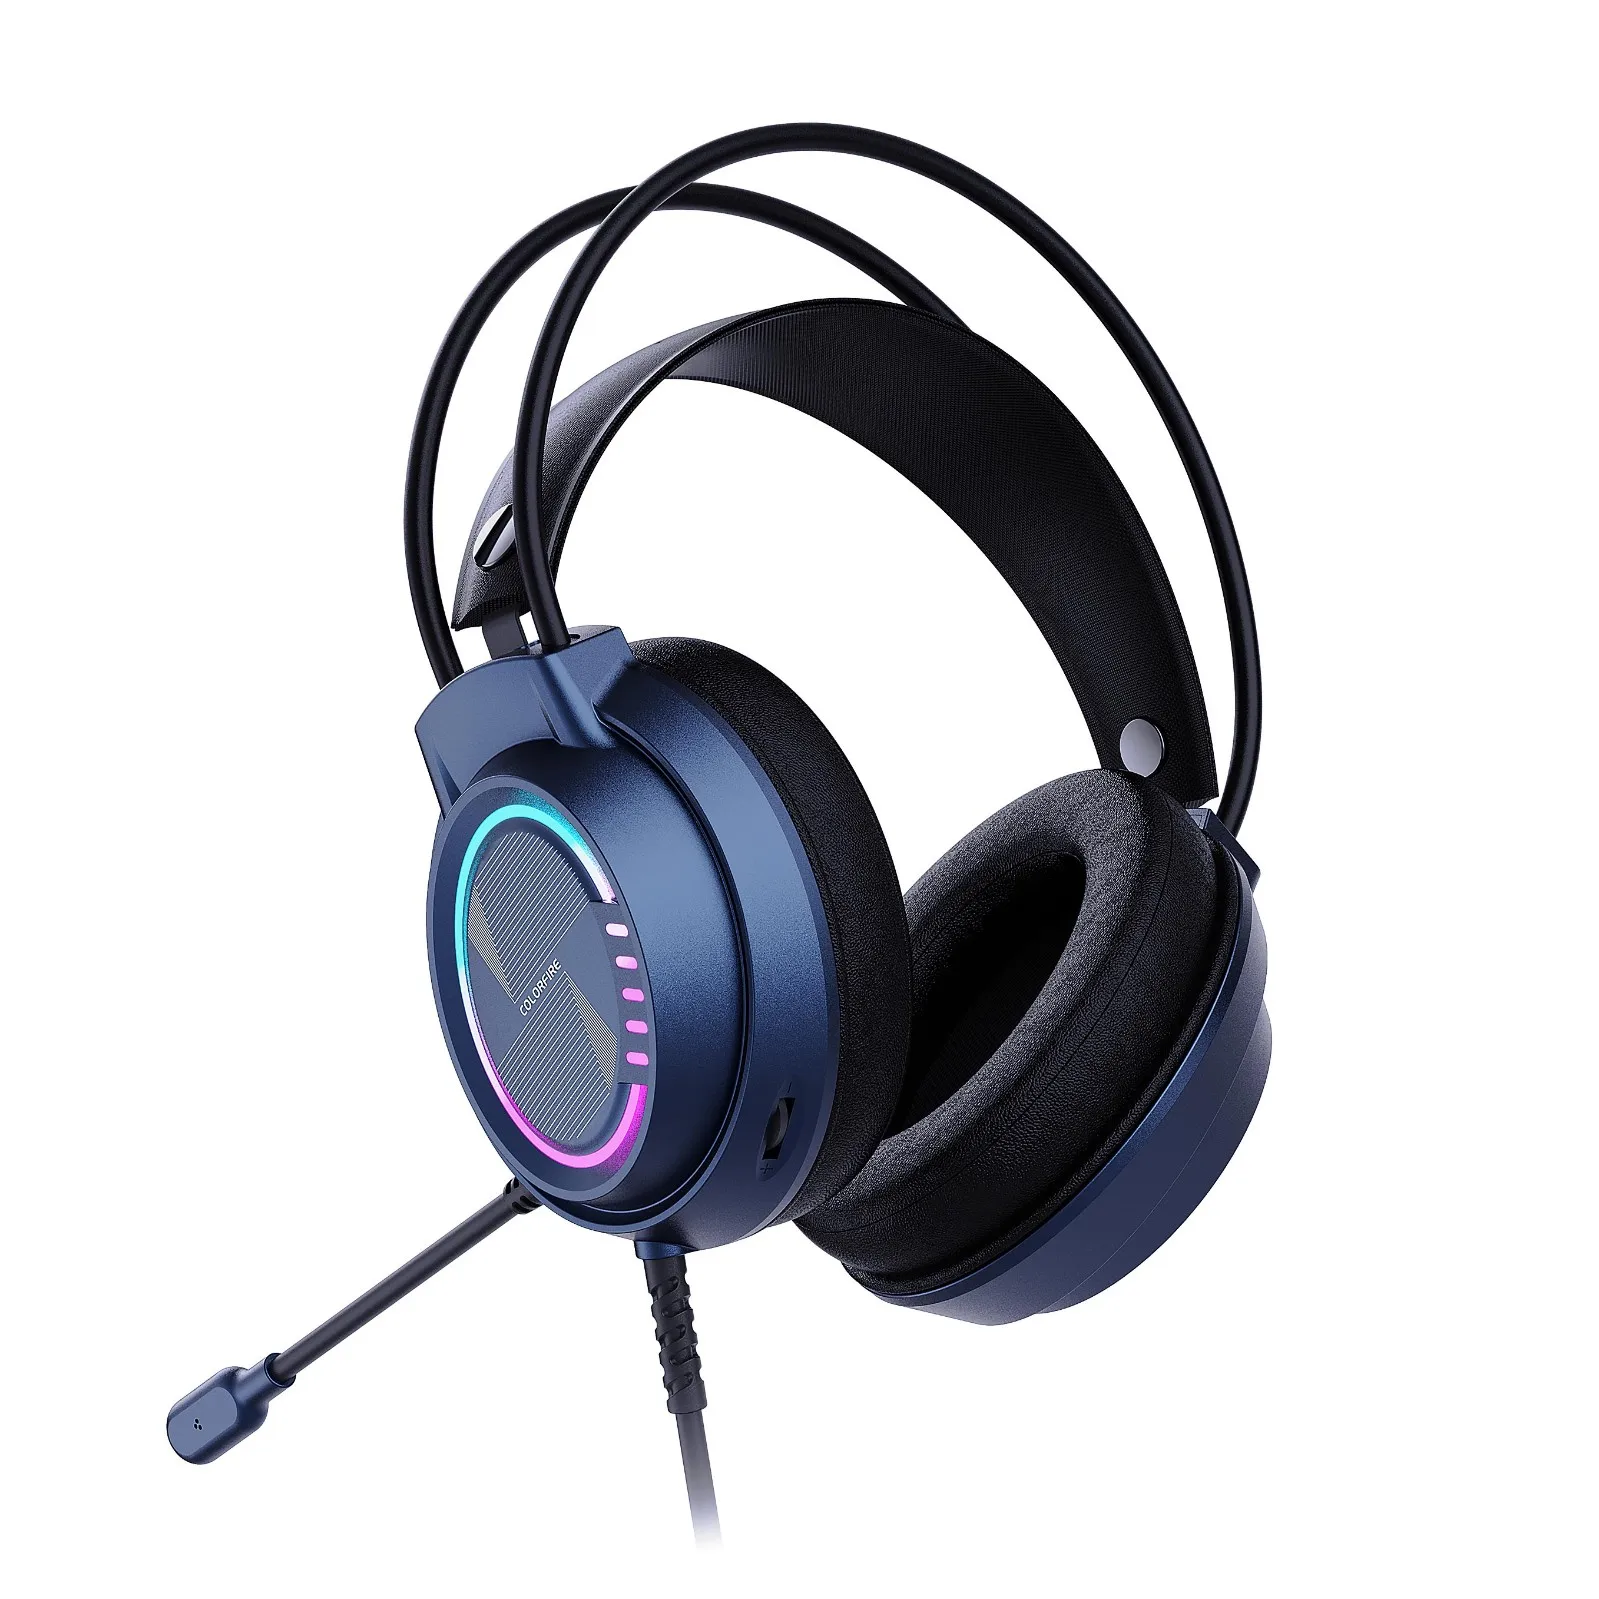 COLORFUL COMET Headset